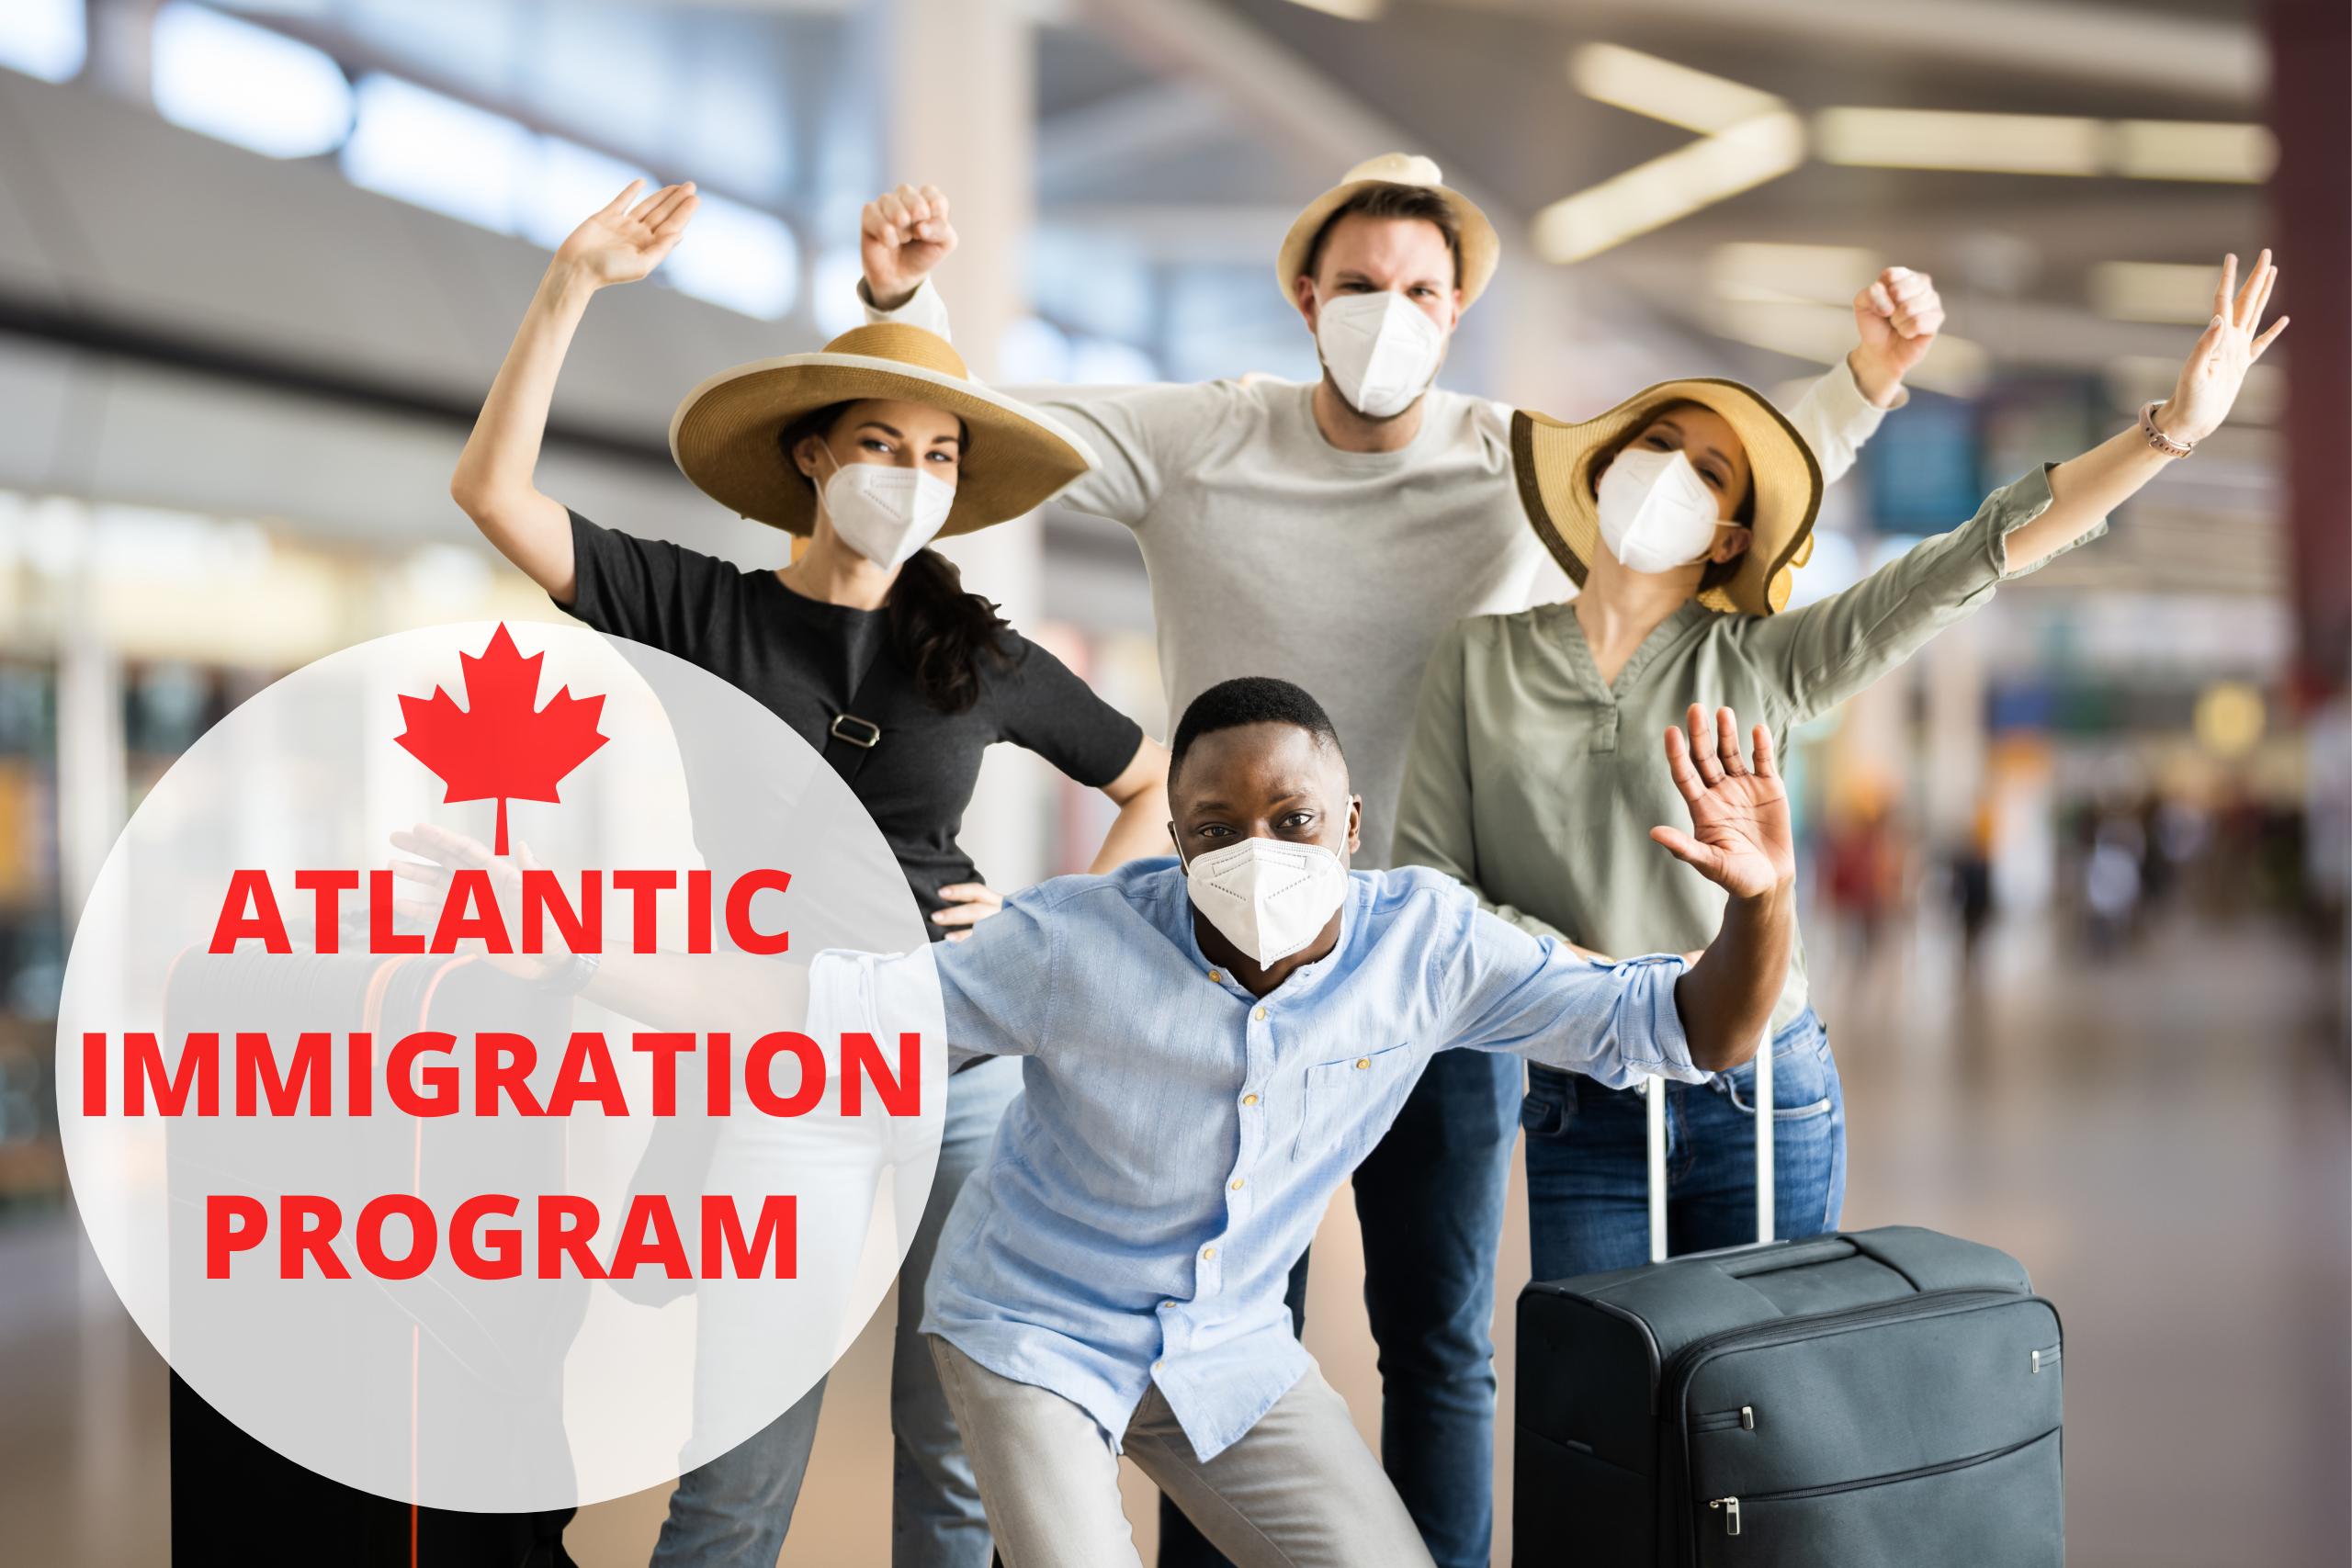 Atlantic Immigration Program - 2 men and 2 women happily posing for a photo with their luggage in an airport